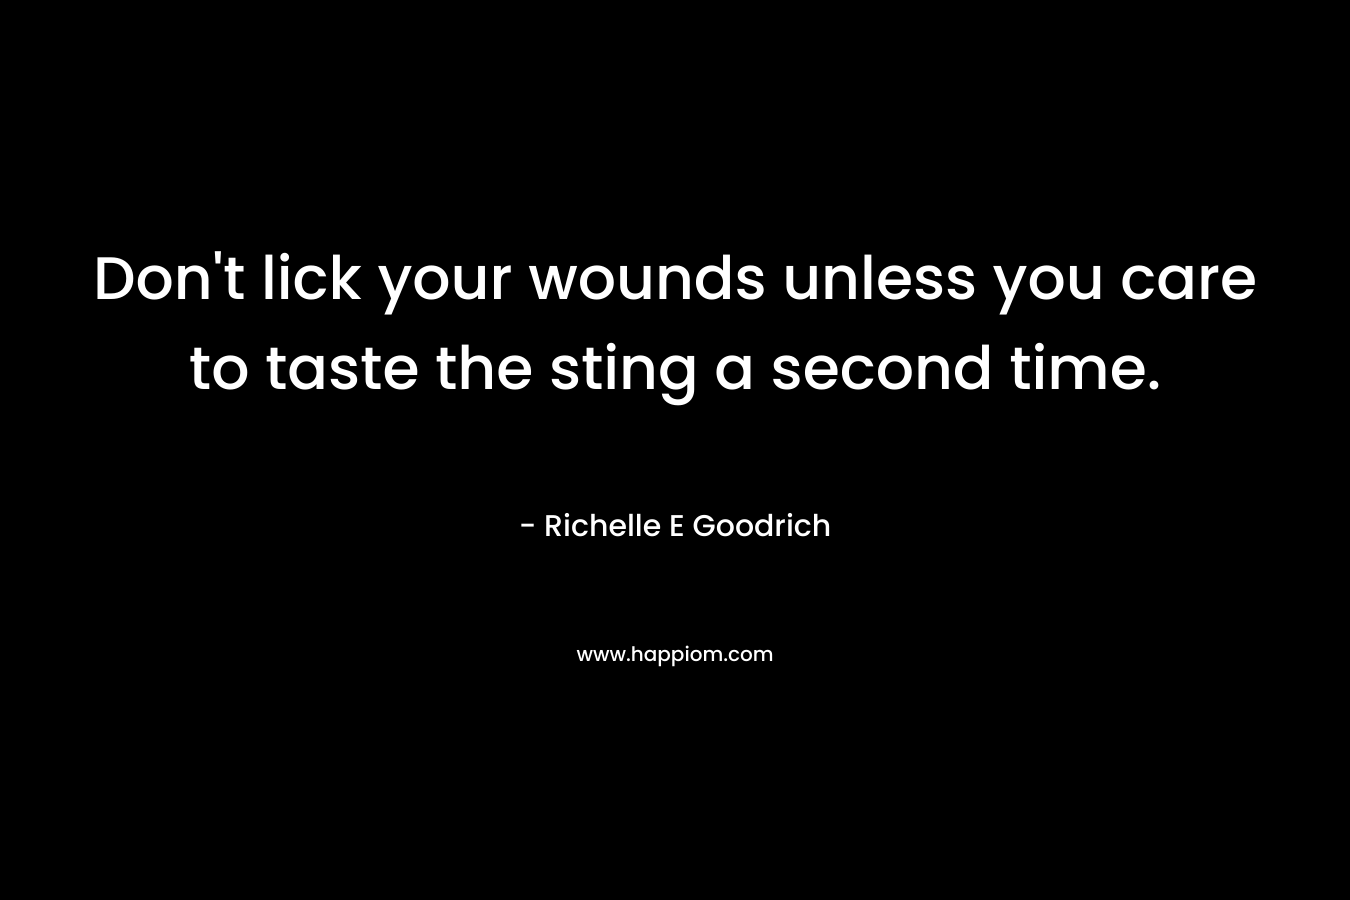 Don’t lick your wounds unless you care to taste the sting a second time. – Richelle E Goodrich